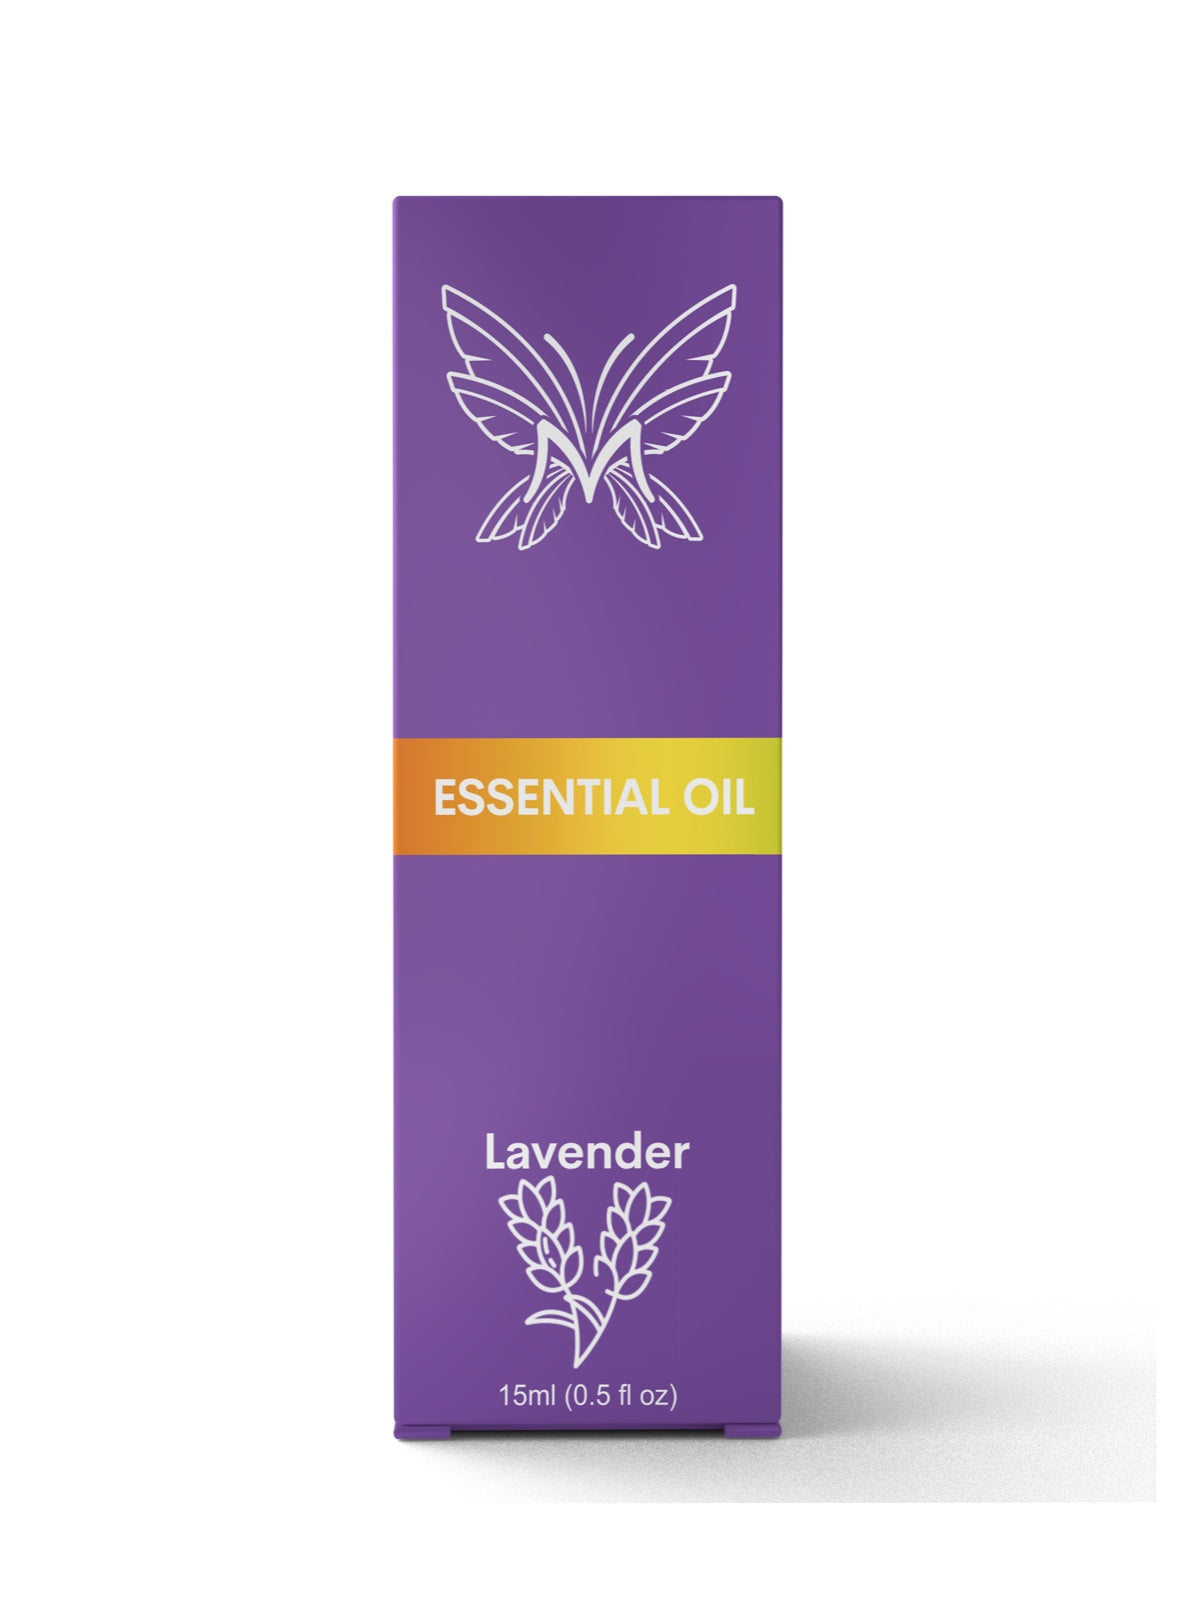 Lavender Oil – Pure and Fresh Essential Oil with Peaceful Floral Aroma